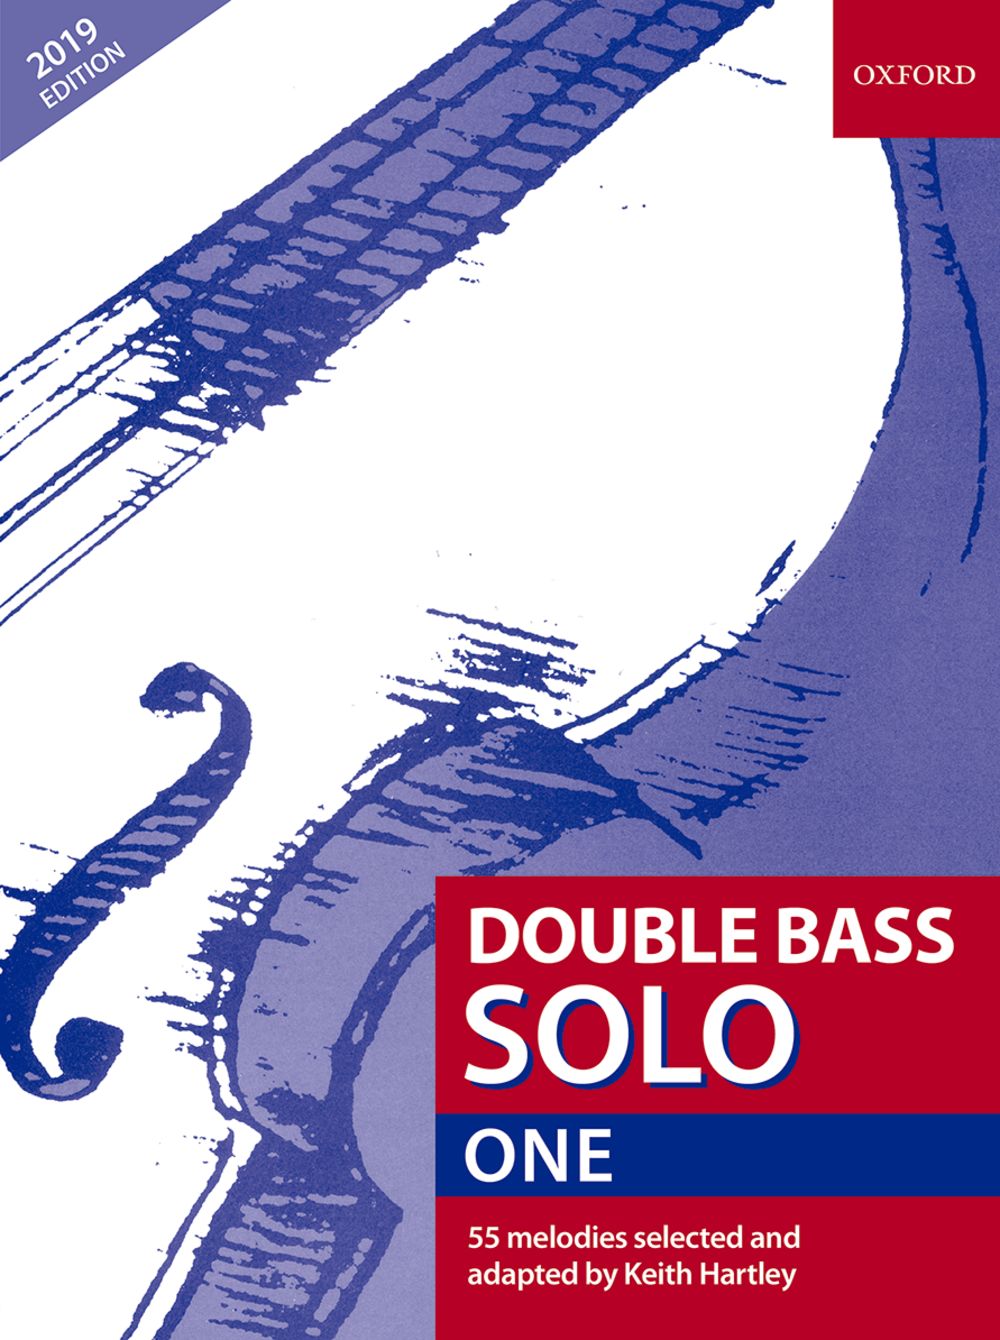 Double Bass Solo 1 Hartley New Expanded Ed Sheet Music Songbook